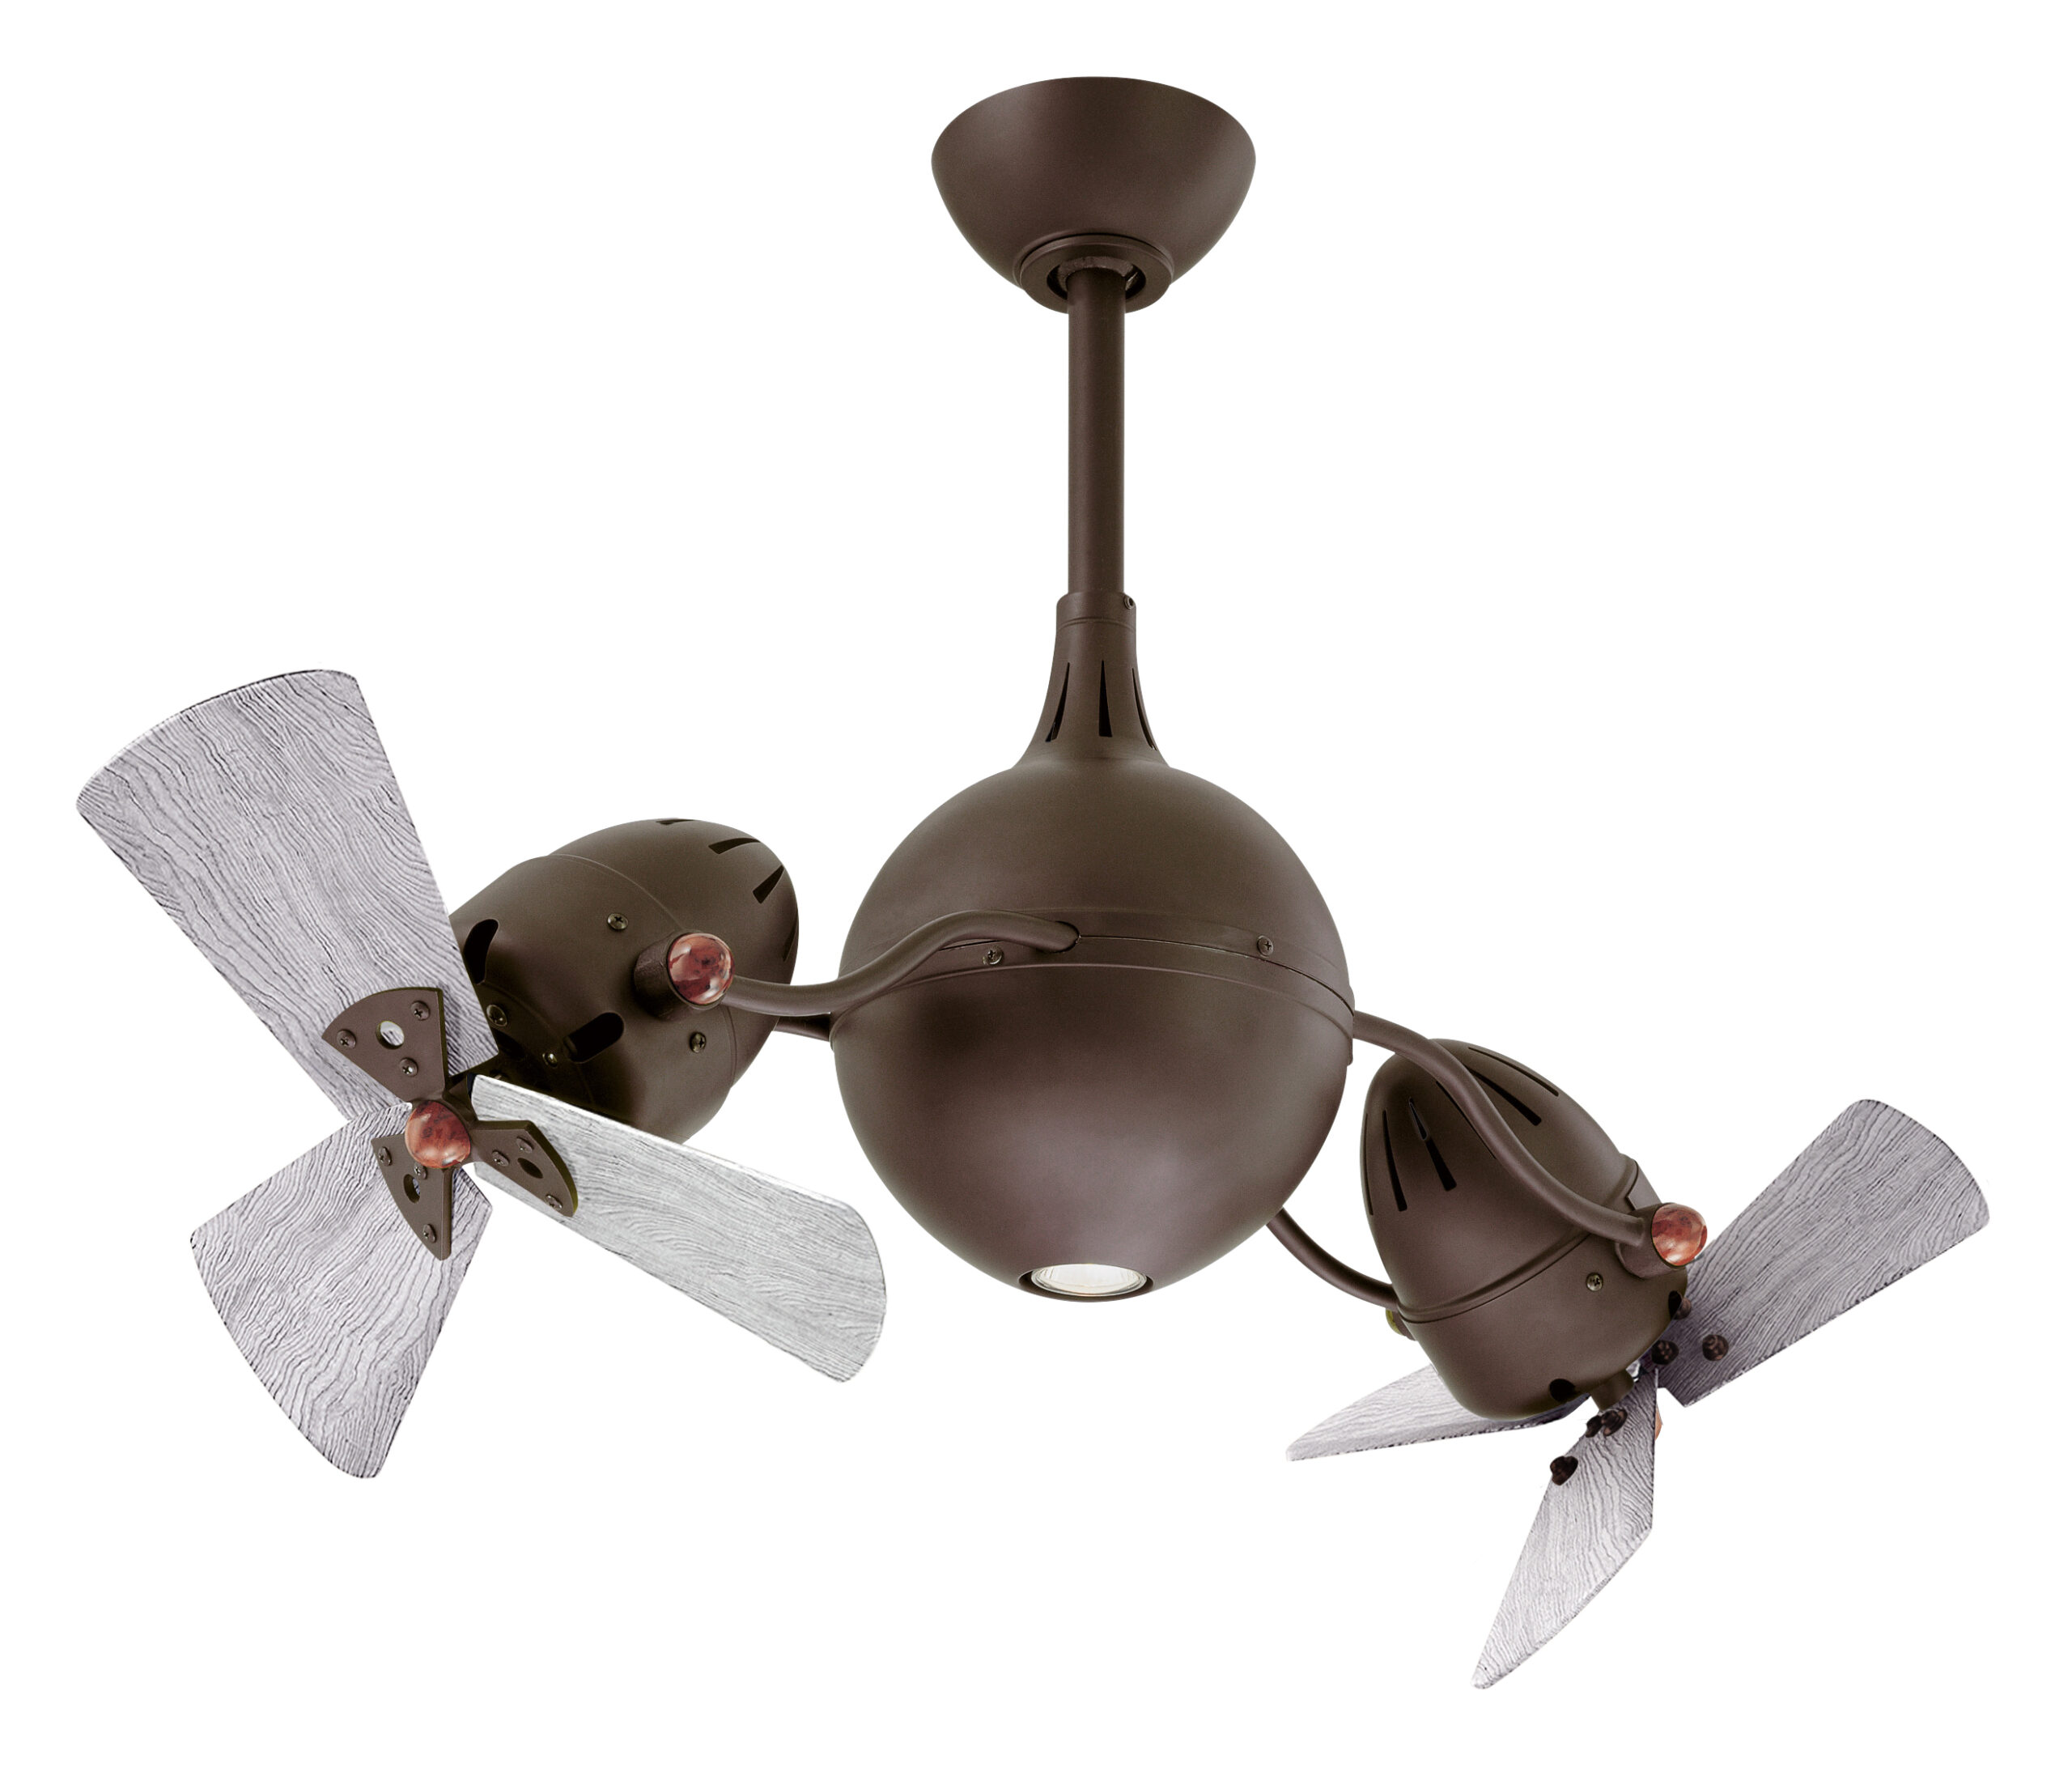 Acqua Rotational Ceiling Fan in Textured Bronze with Barn Wood Blades